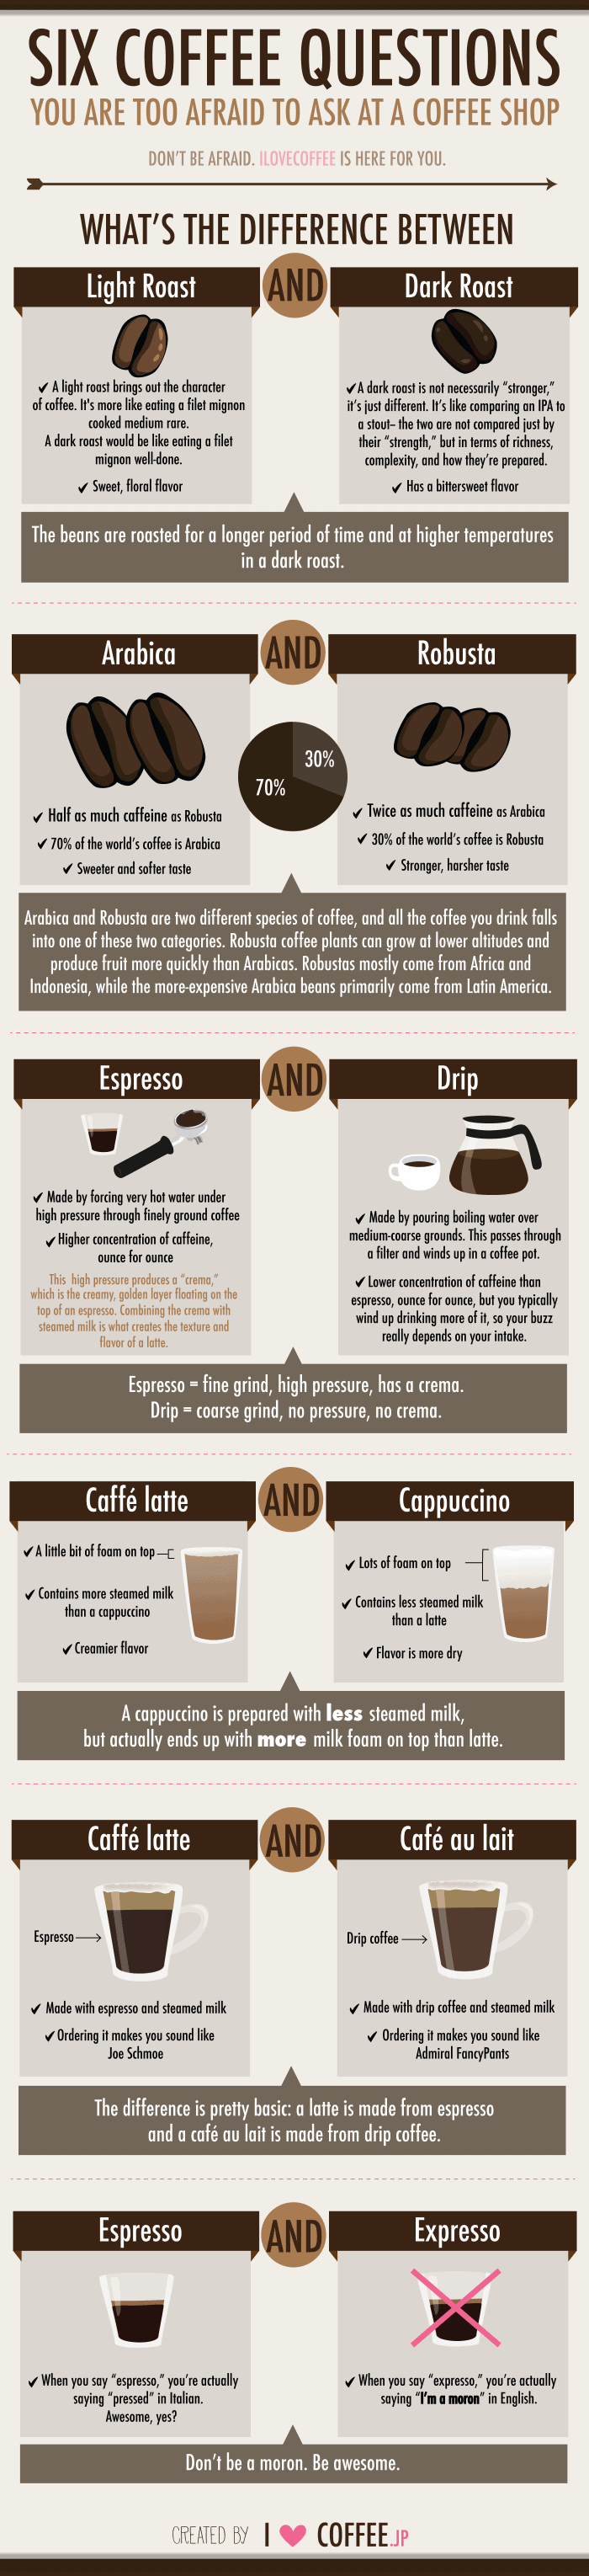 infographic with answers to basic coffee questions